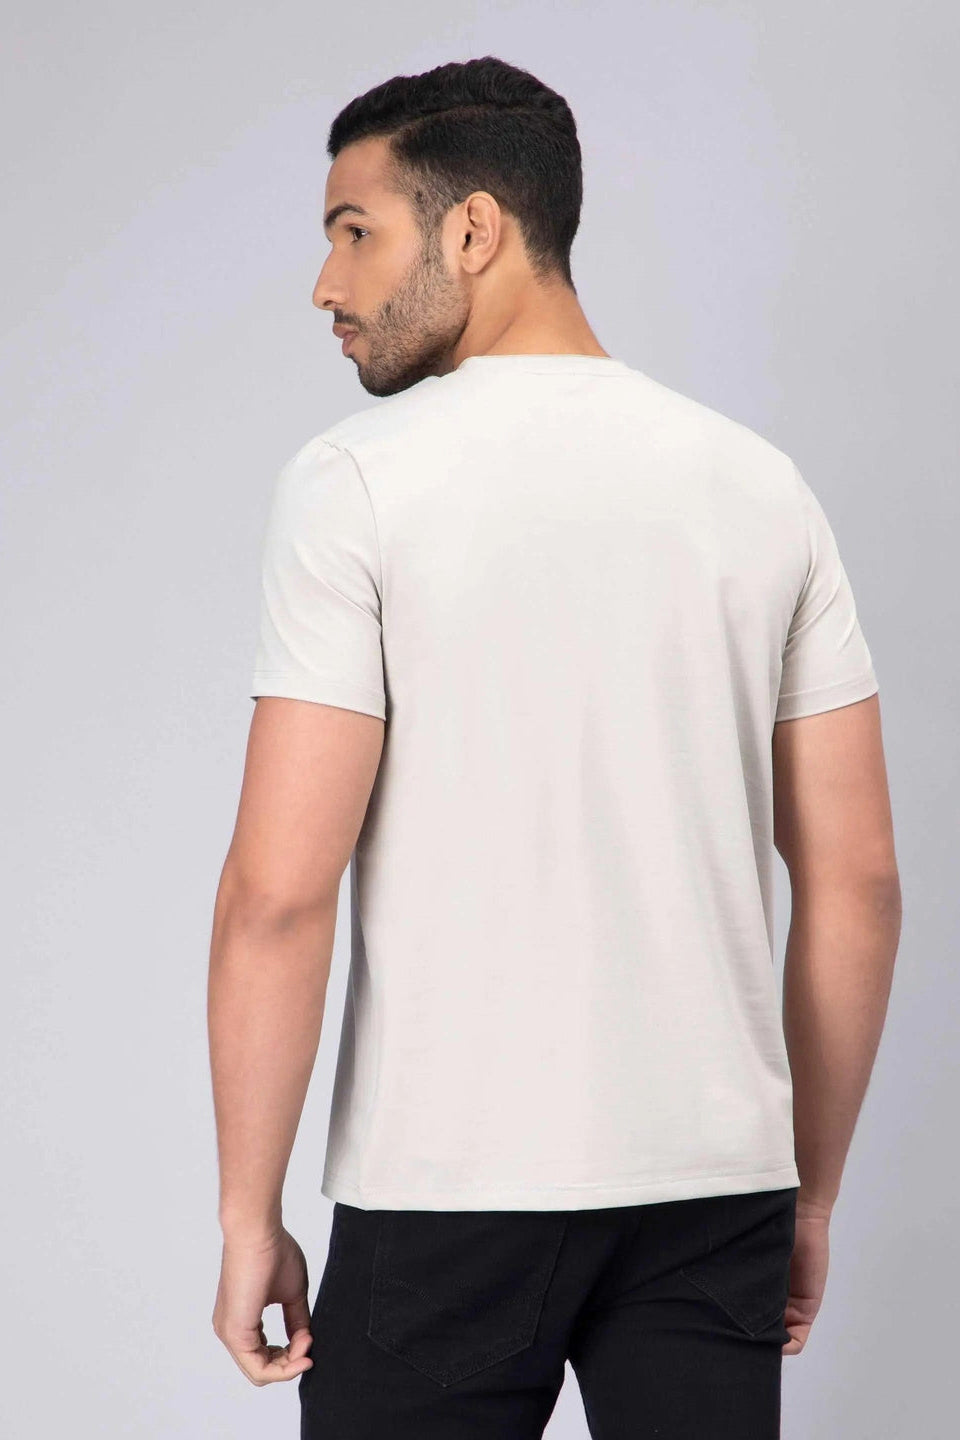 Men's Half-Sleeve Solid Cotton T-shirt with Pocket - Grey